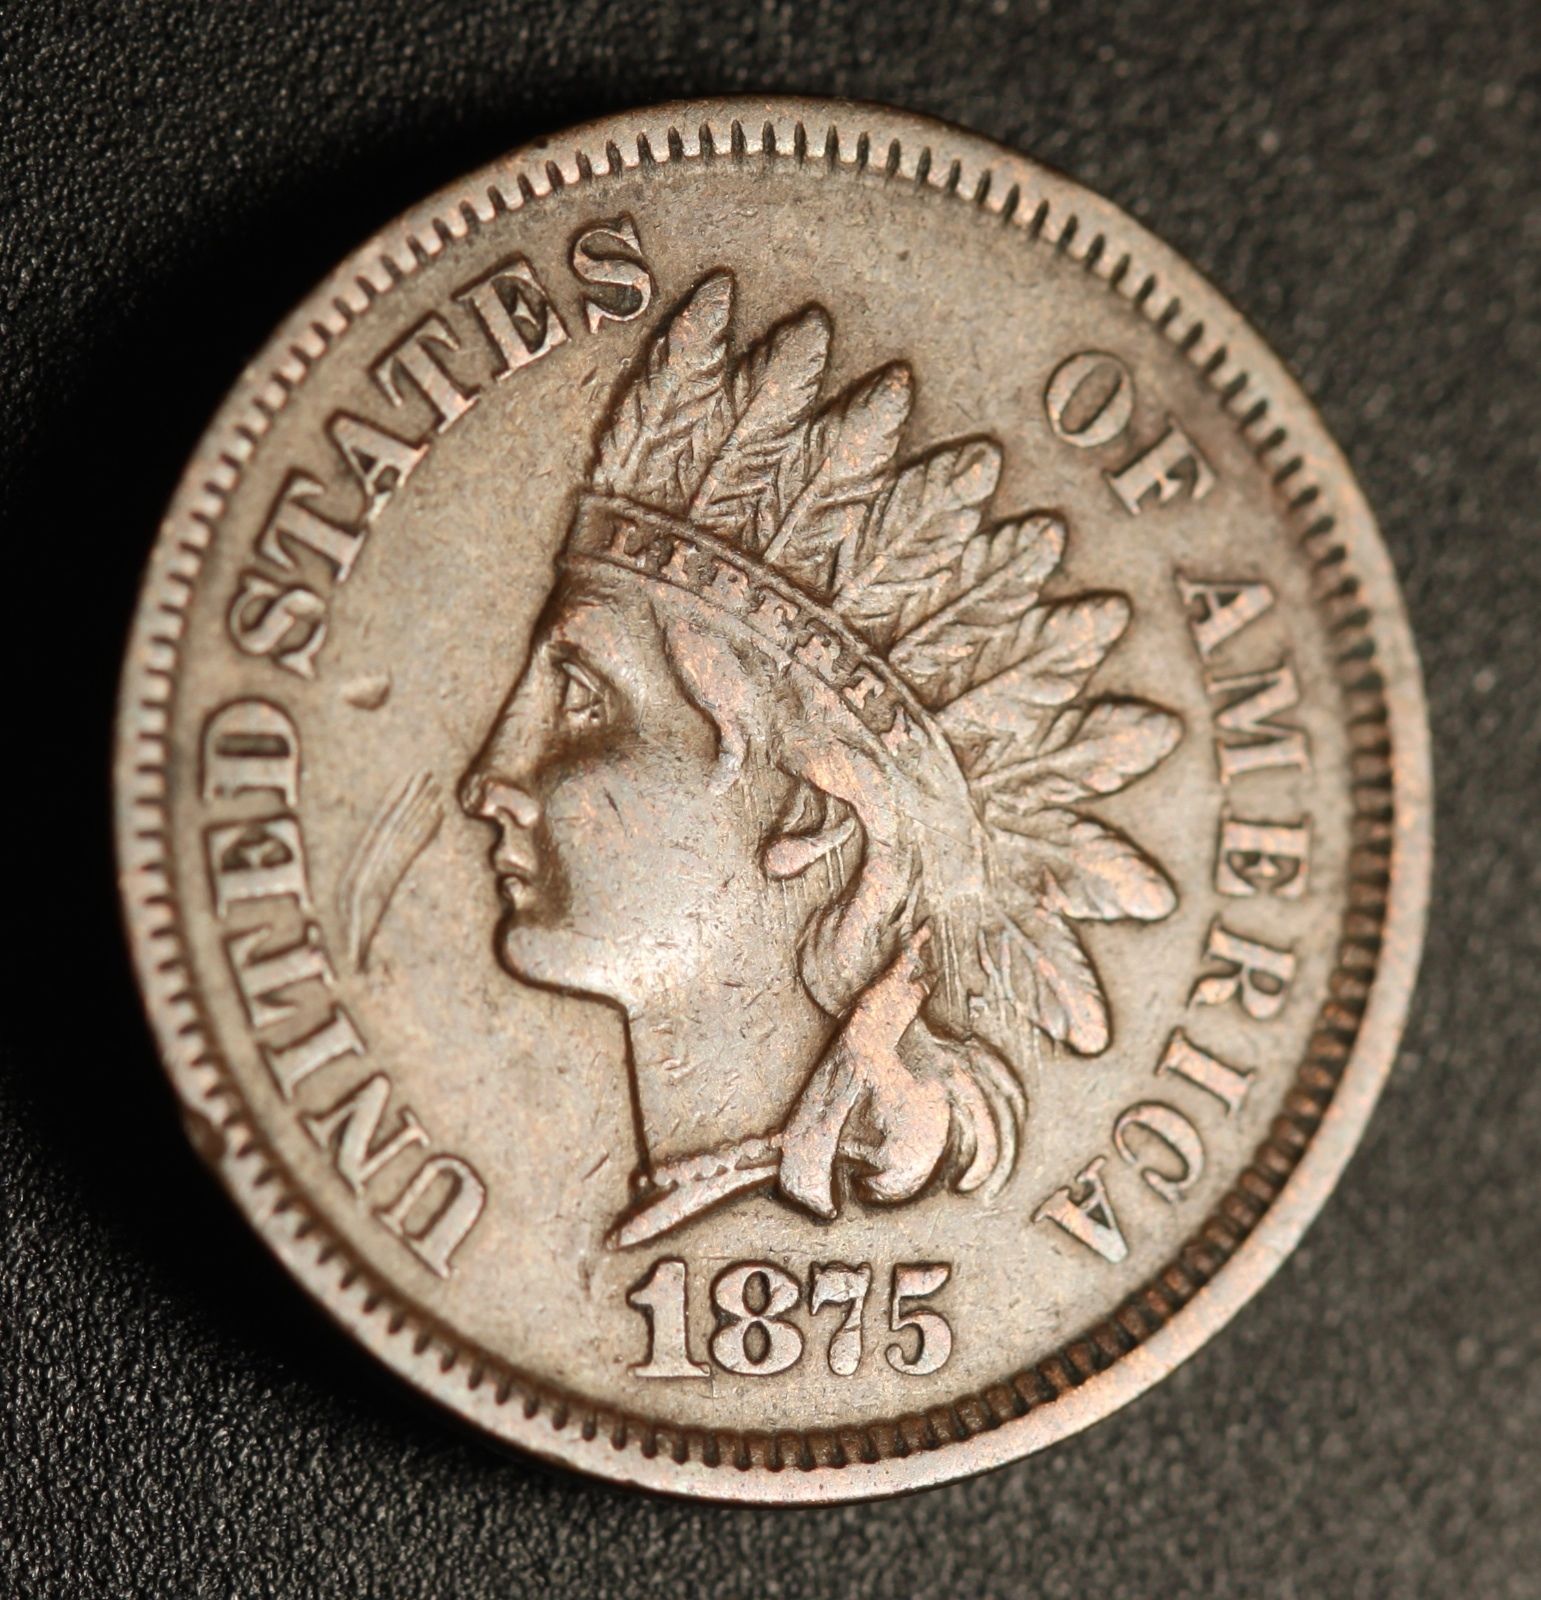 1875 ODD-001 Indian Head Penny - Photo by Ed Nathanson